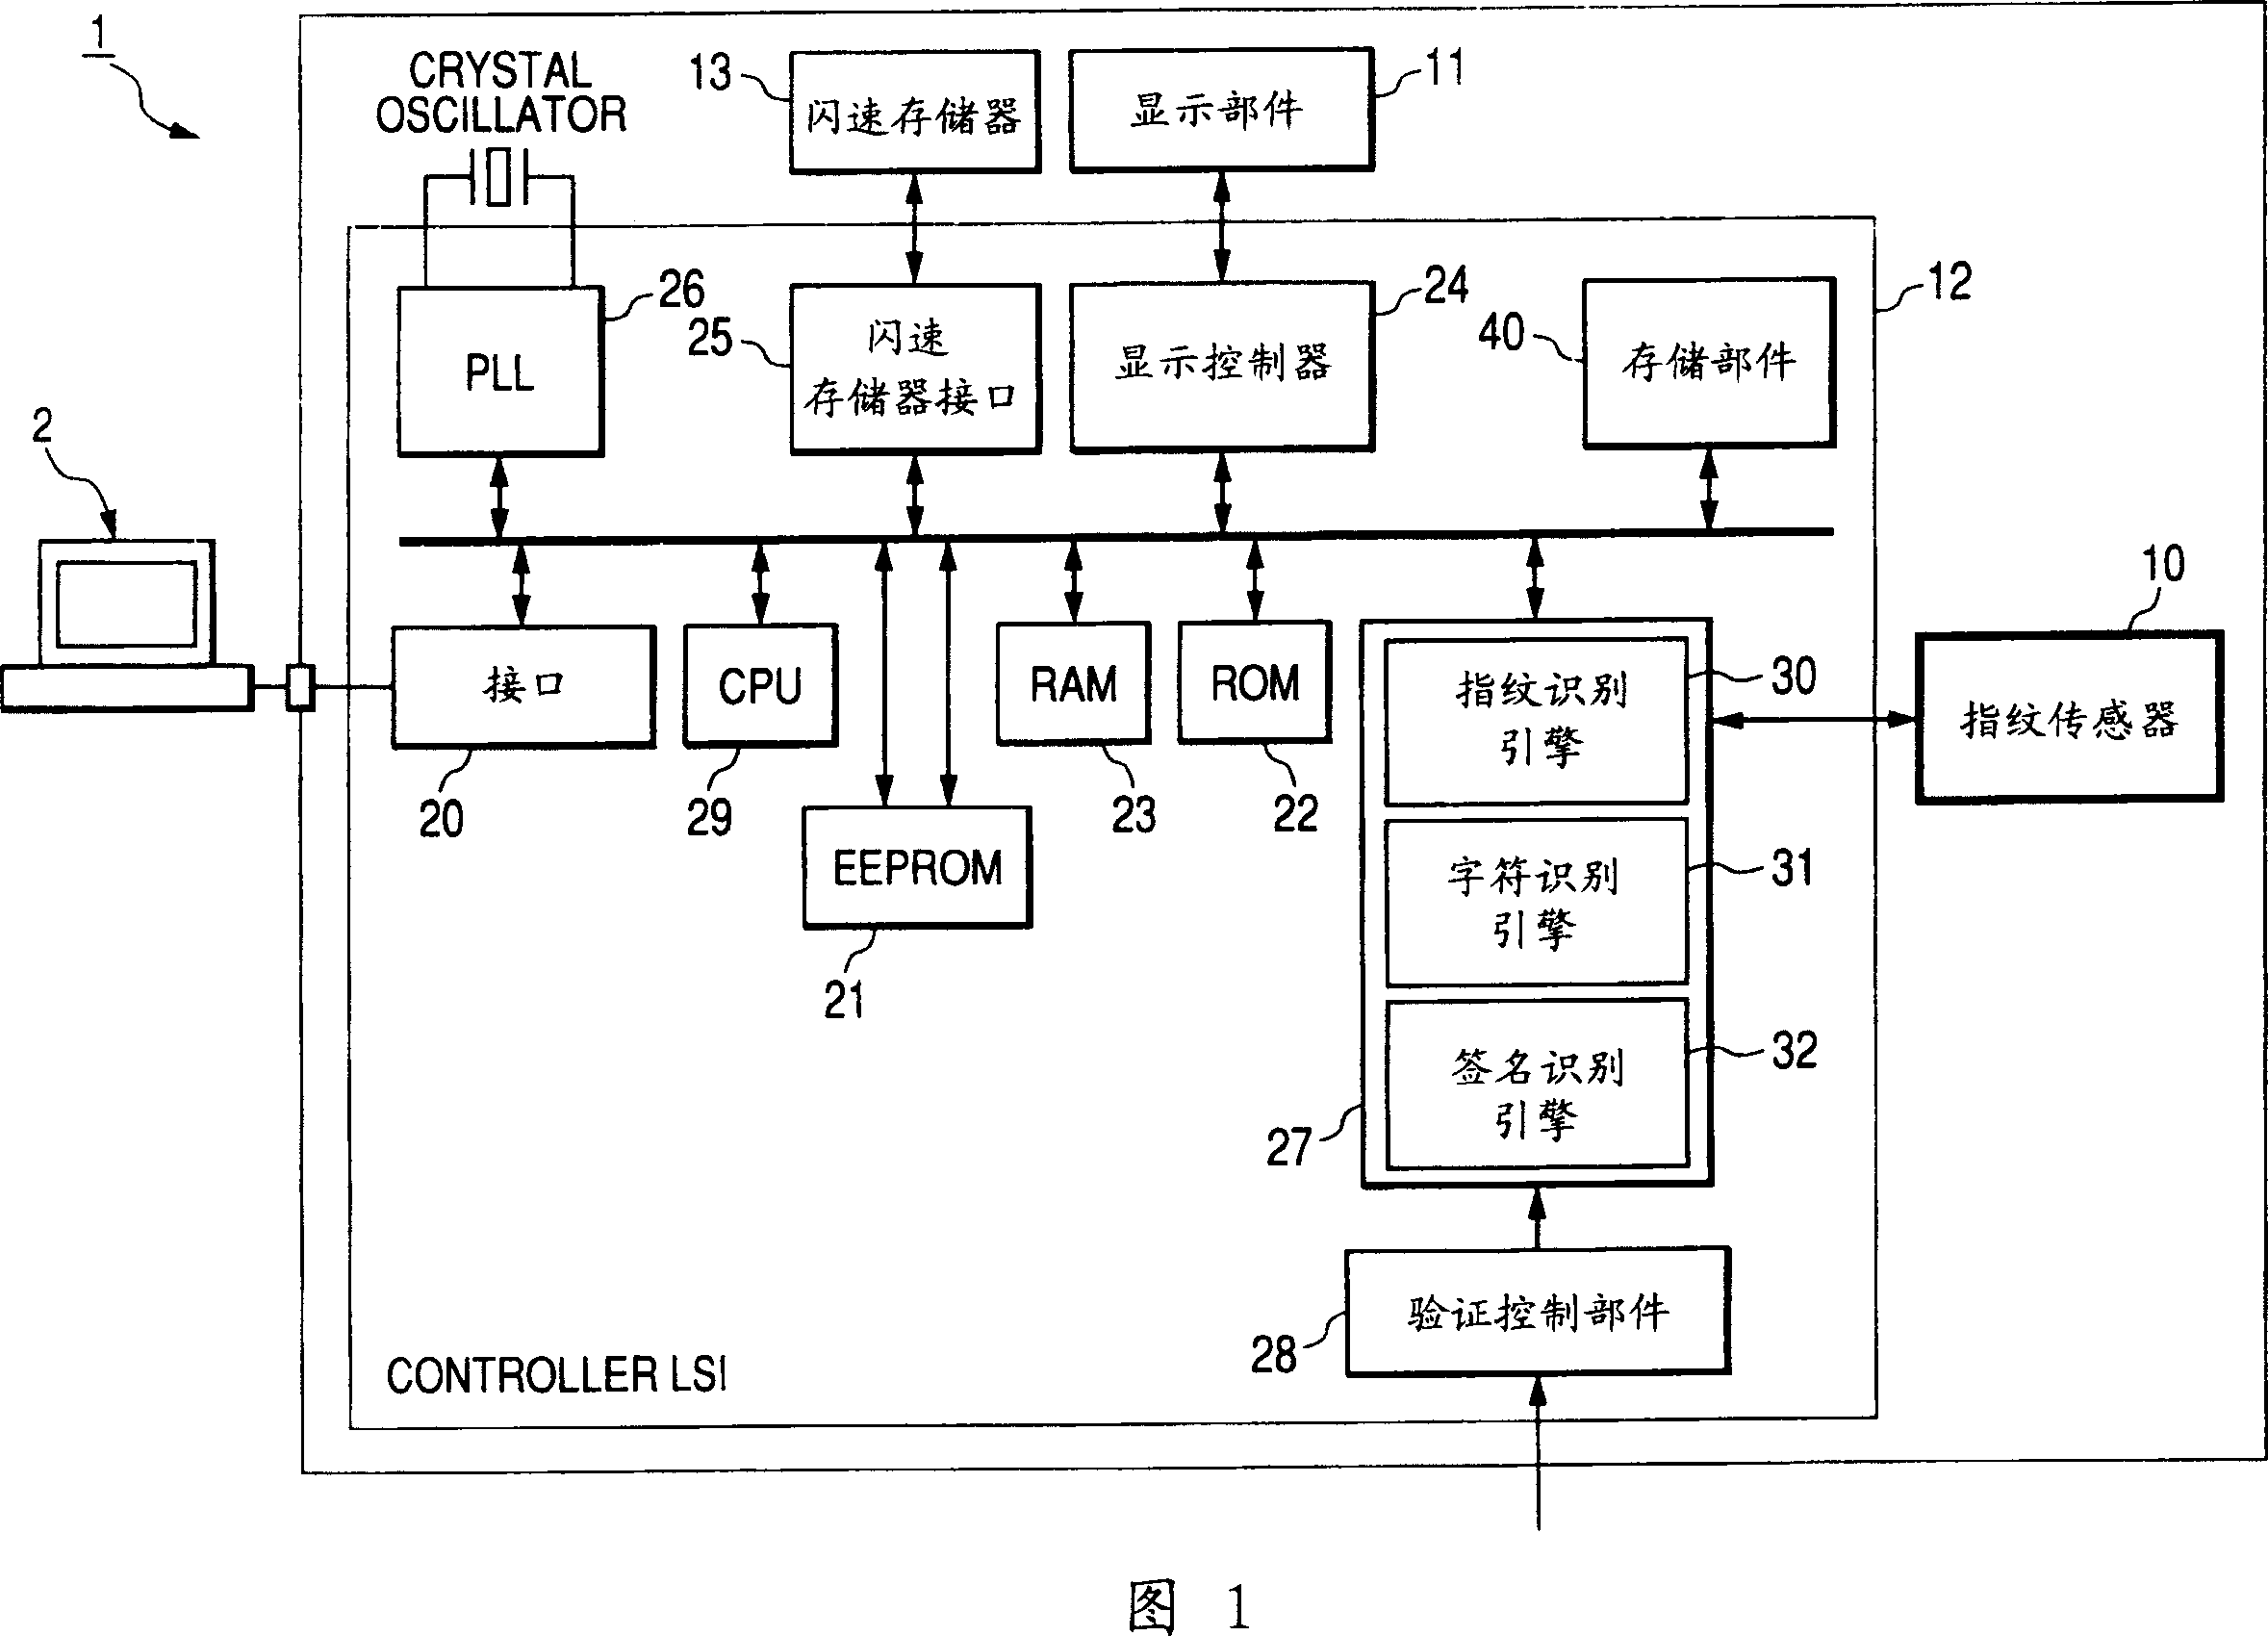 Removable storage device and authentication method